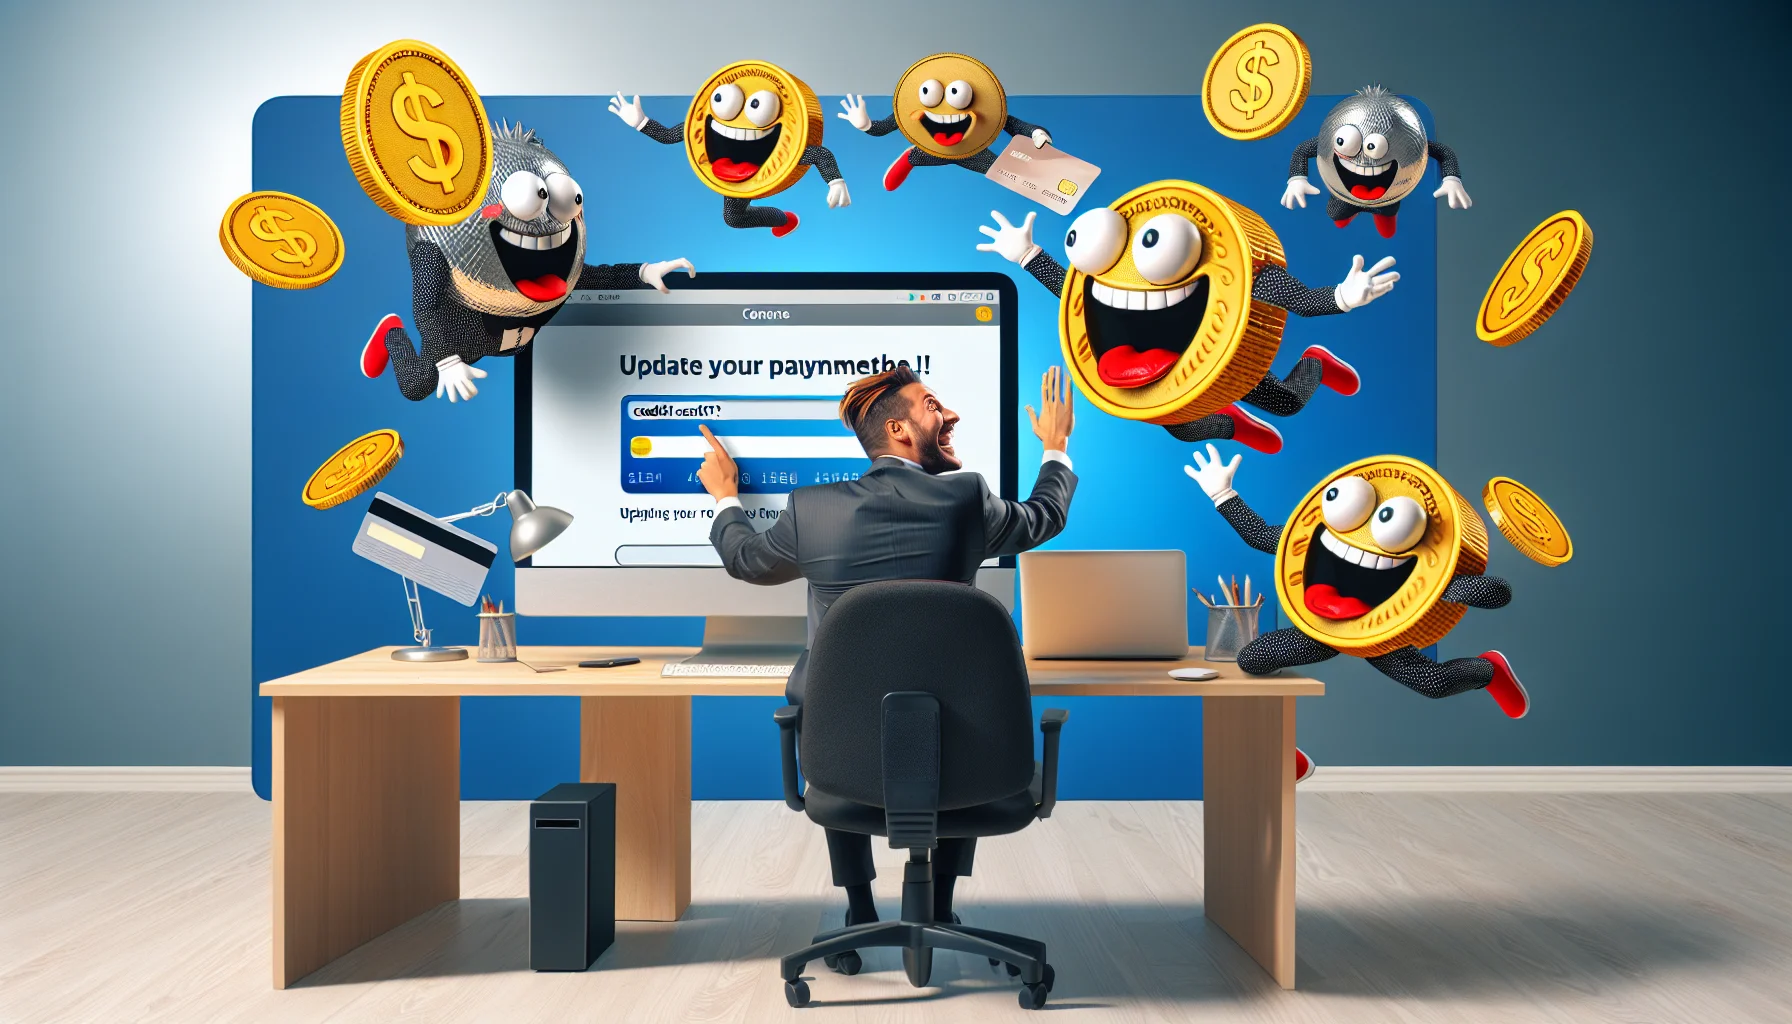 Create an eccentric and amusing scene of a generic person on a computer updating their payment method on a fictional web hosting platform. The person should be surrounded by laughing mascots that represent coins and credit cards, attempting to 'jump' into the computer screen. To enhance the visual comedy, show elements of surprise on the person's face as well as the mascots'. The environment should reflect a professional home-office setup, indicating the seriousness of the task amidst the fun chaos.